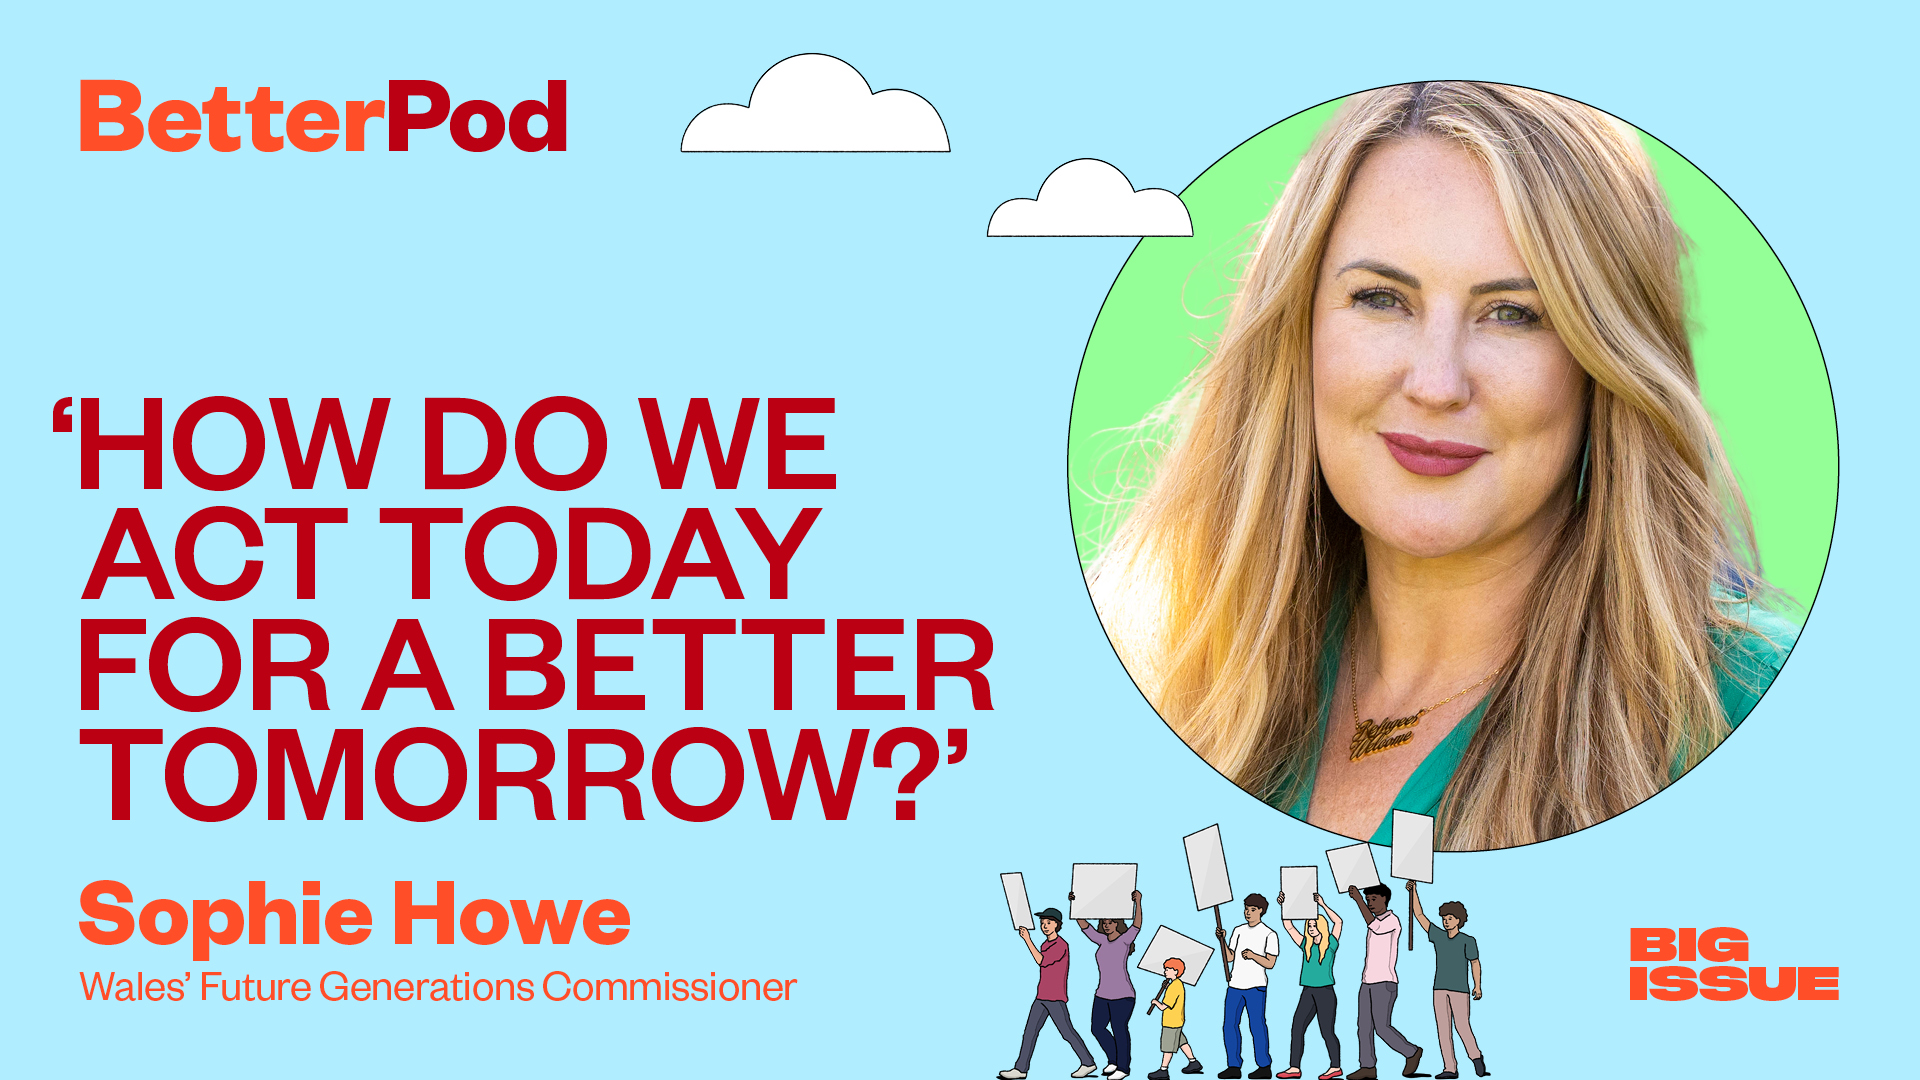 Sophie Howe Wales' Future Generations Commissioner on BetterPod